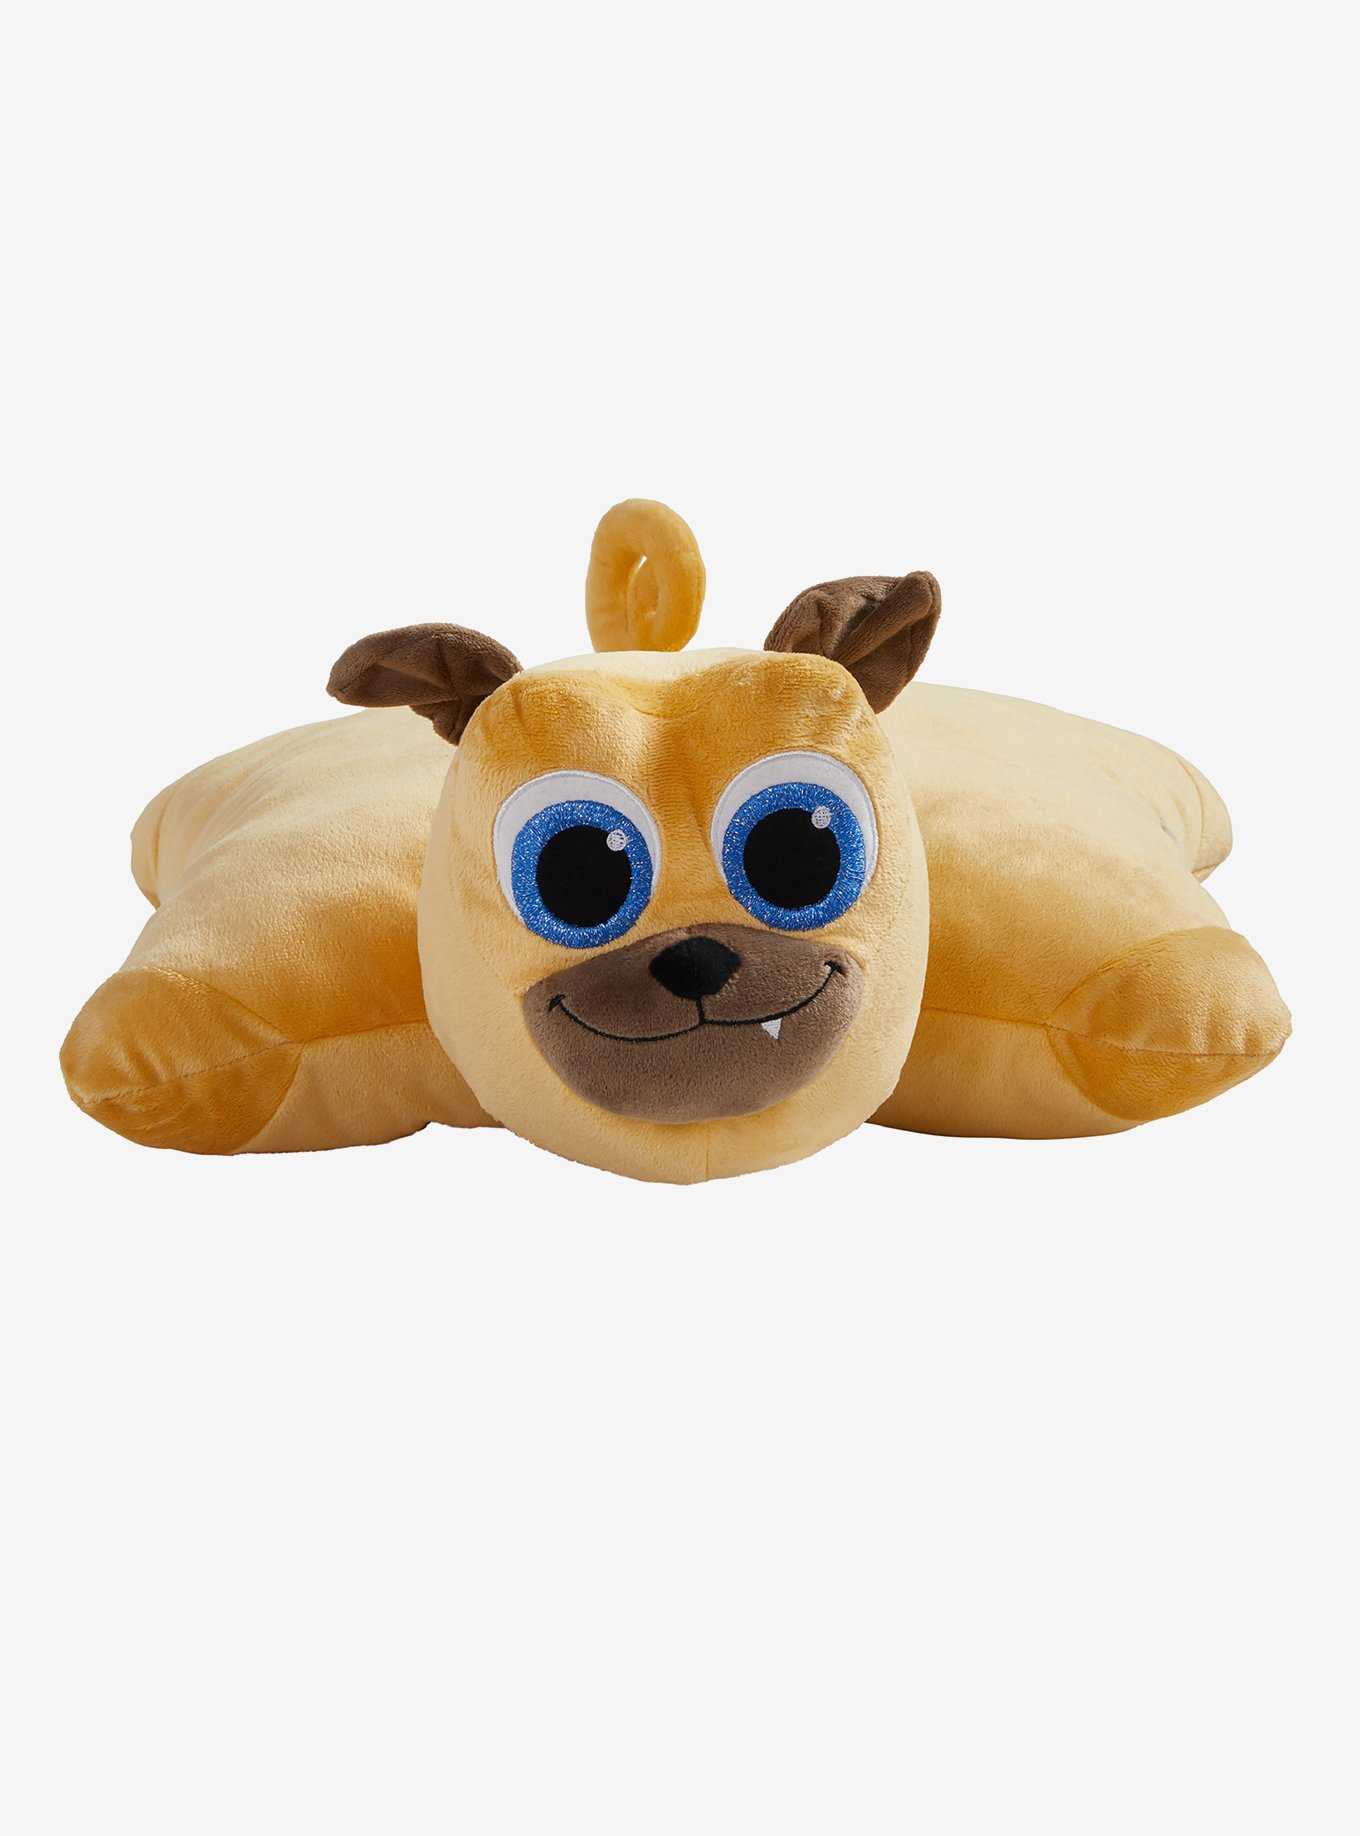 Puppy Dog Pals Large Rolly Pillow Pets Plush Toy, , hi-res